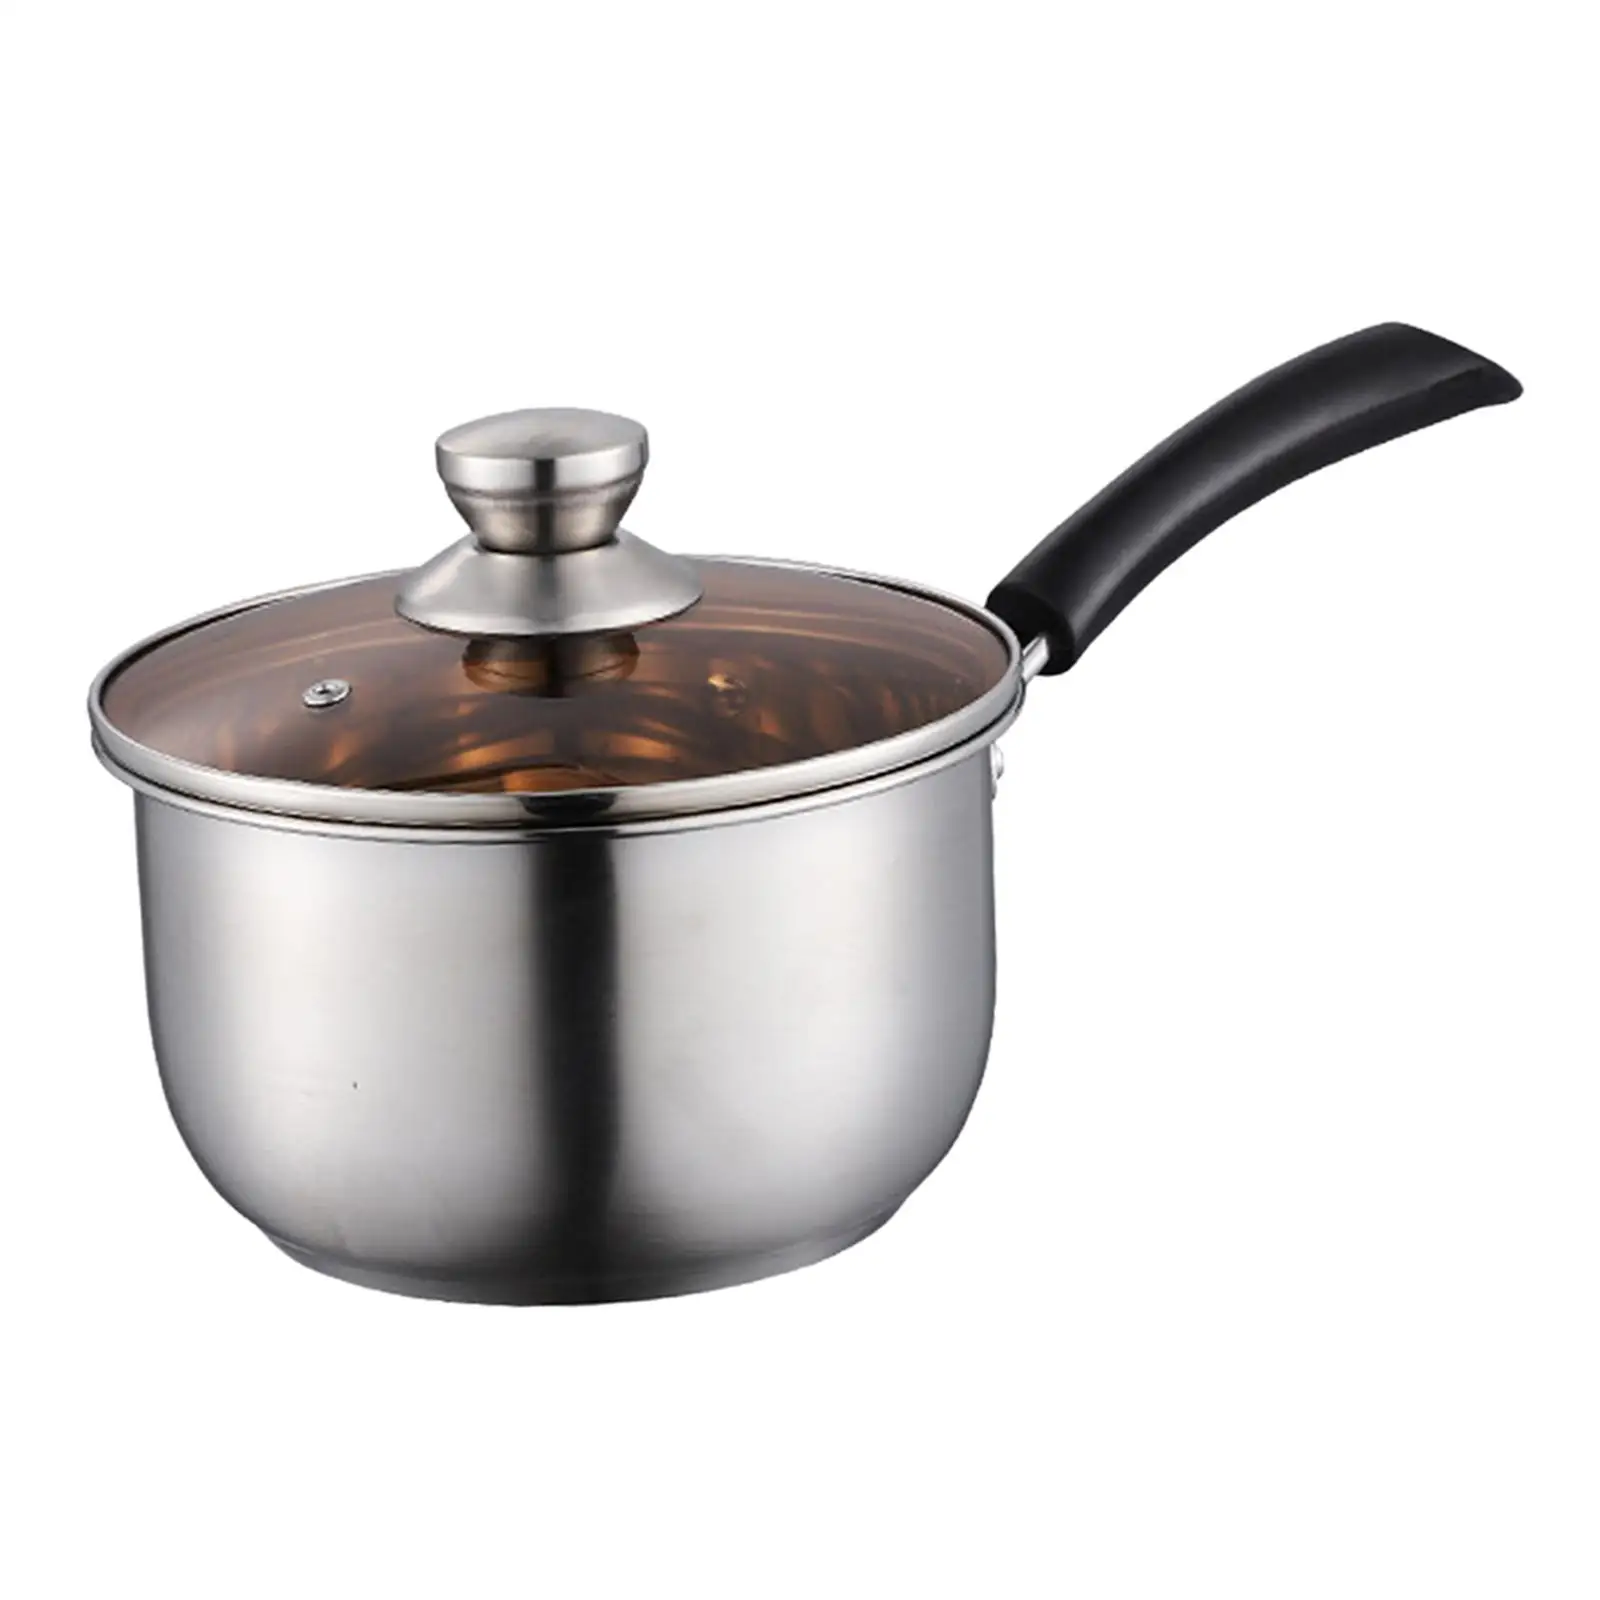 Multipurpose Saucepan with Lid, Cooking Pot, Milk Pot, Butter Warmer for Restaurant Dining Room Kitchen Home